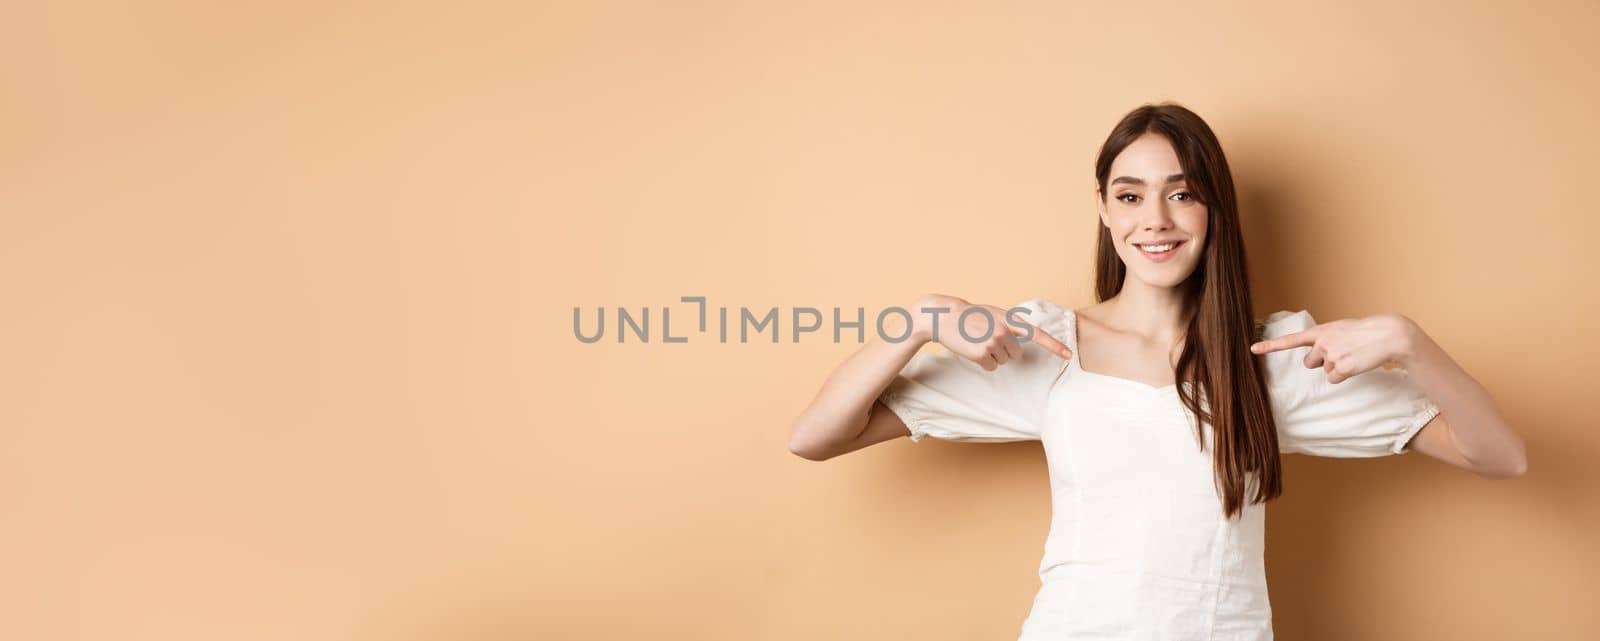 Smiling woman pointing at center, showing logo with happy face, standing in white dress on beige background.